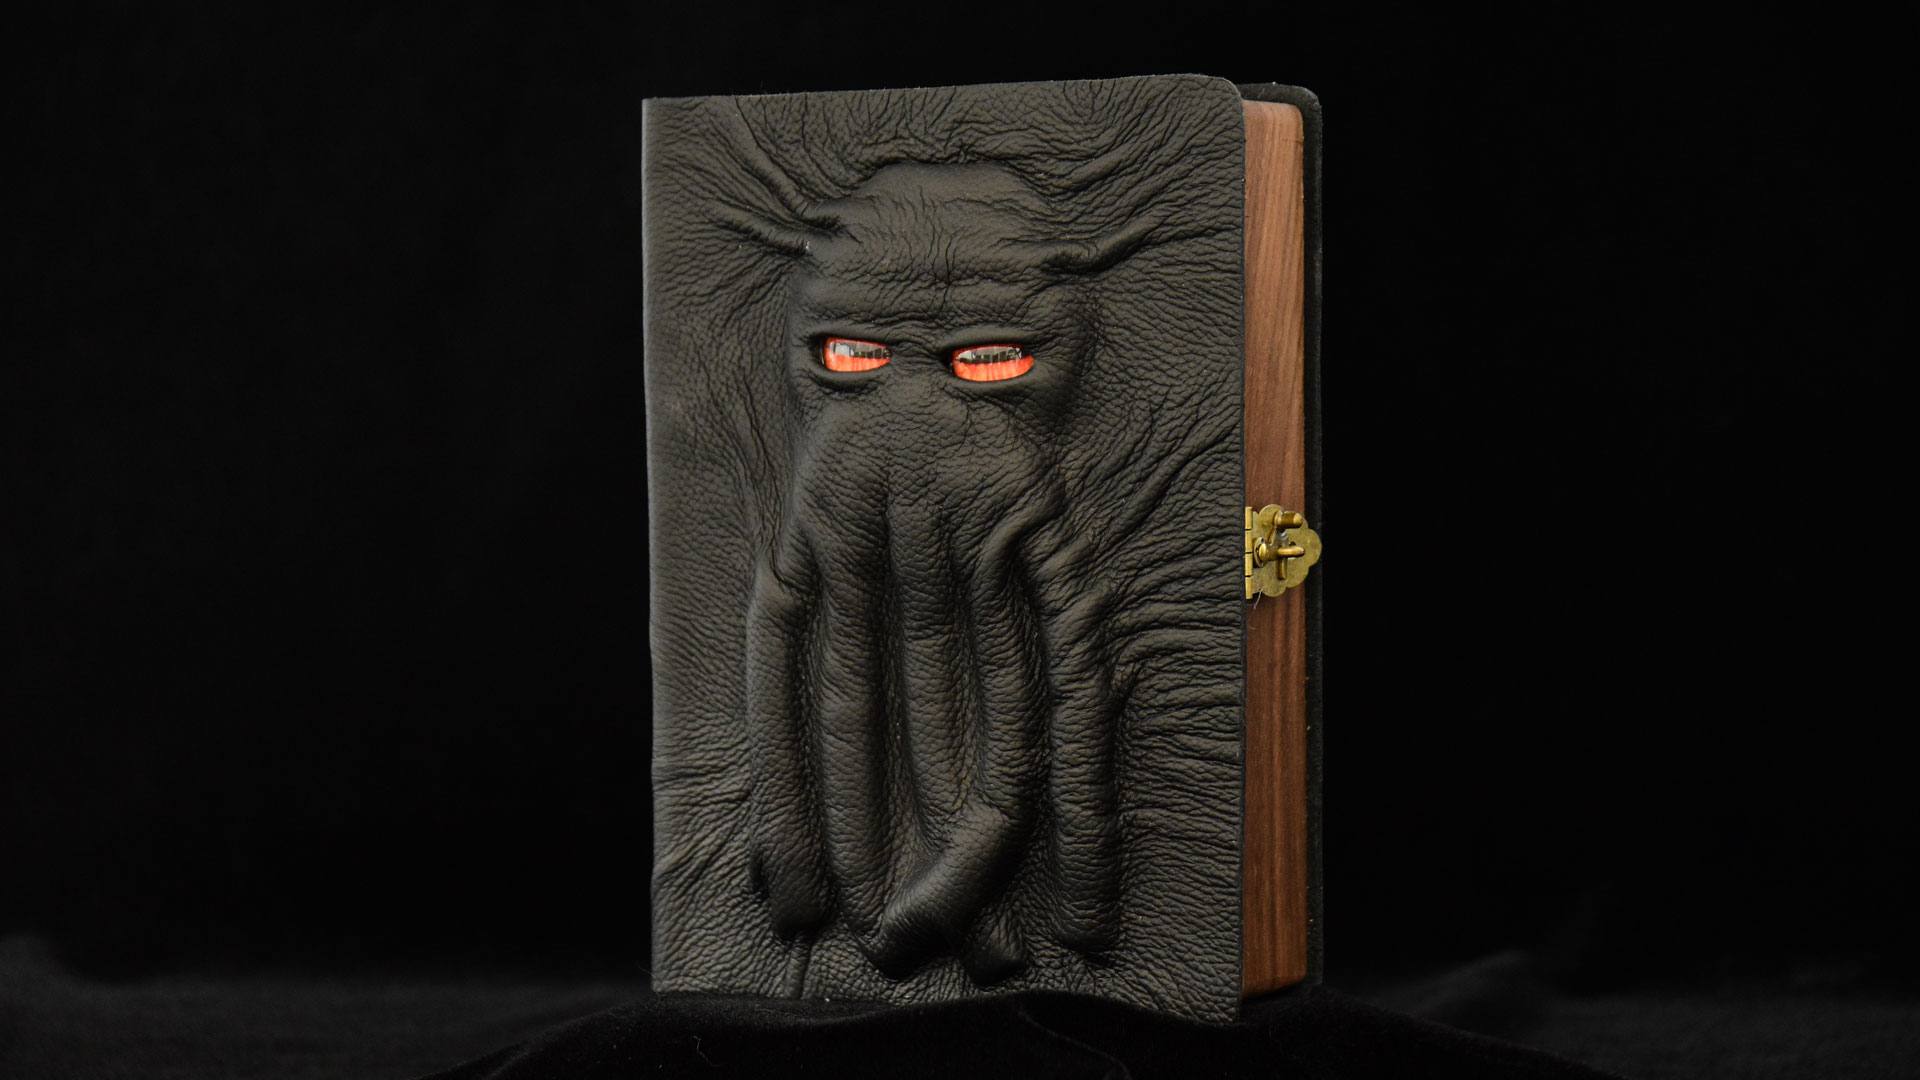 Cthulhu leather crafted Spellbook dice and gaming box for DnD and tabletop RPG